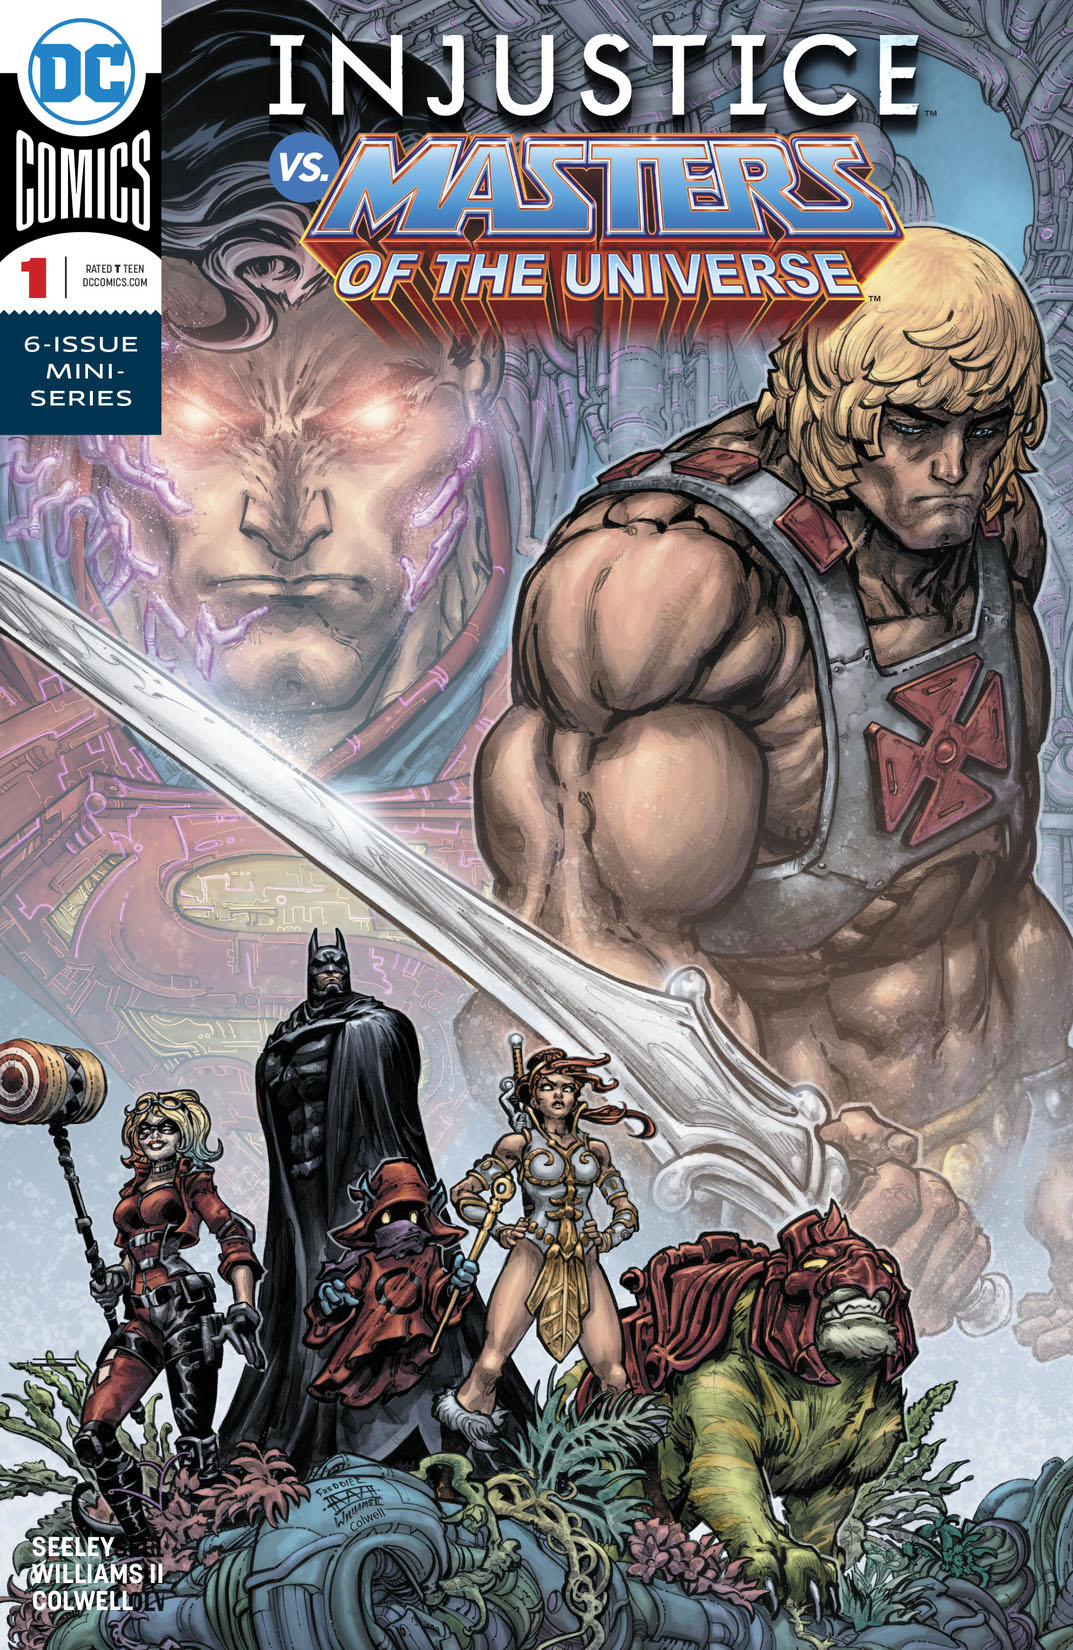 Injustice Vs. Masters of the Universe #1 preview images